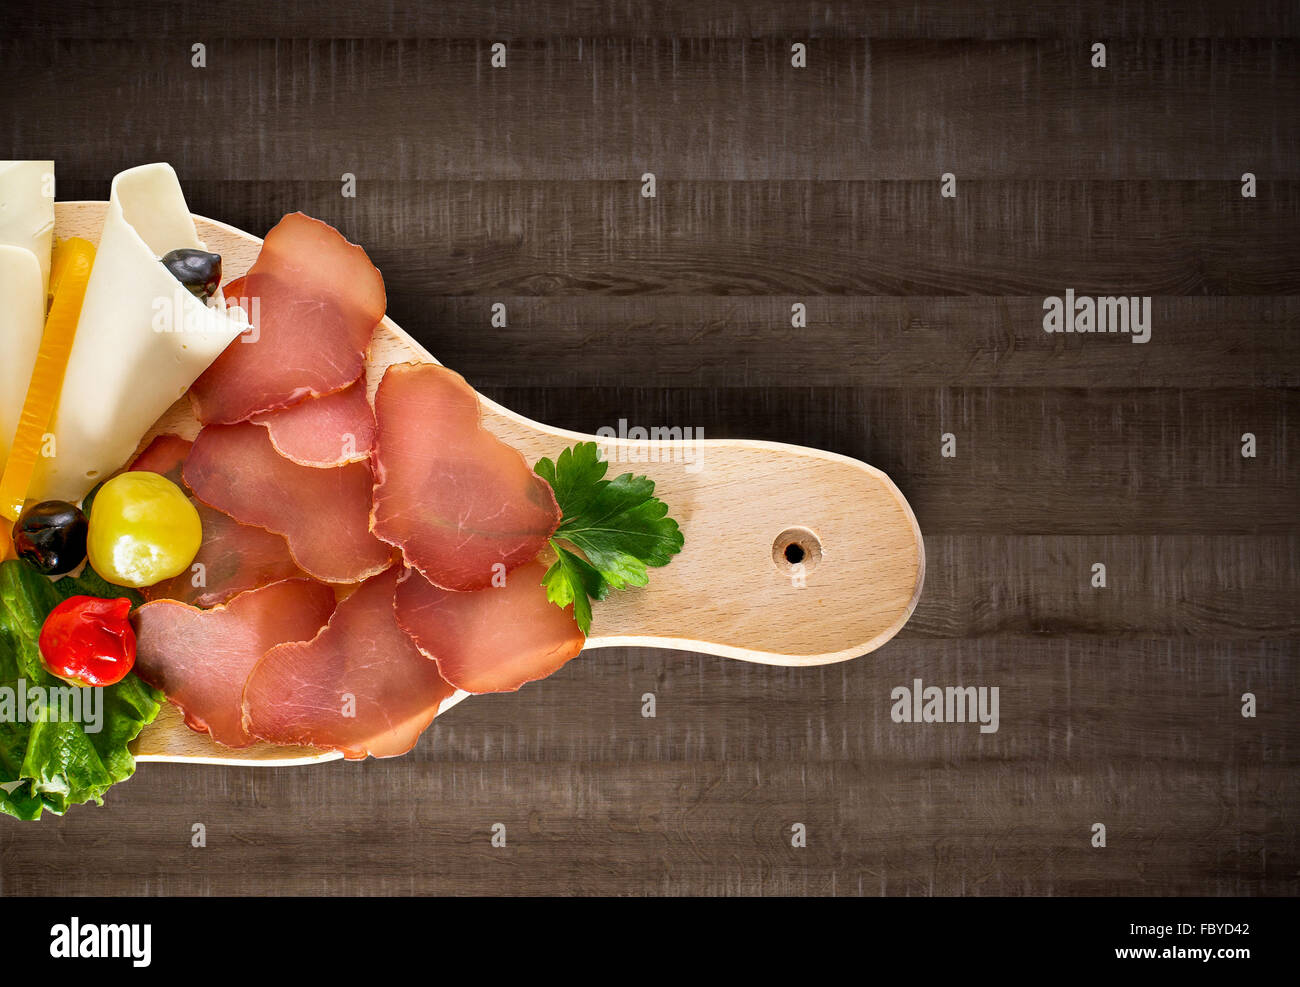 Prosciutto - parma smoked ham with vegetables on wooden board and clipping path Stock Photo